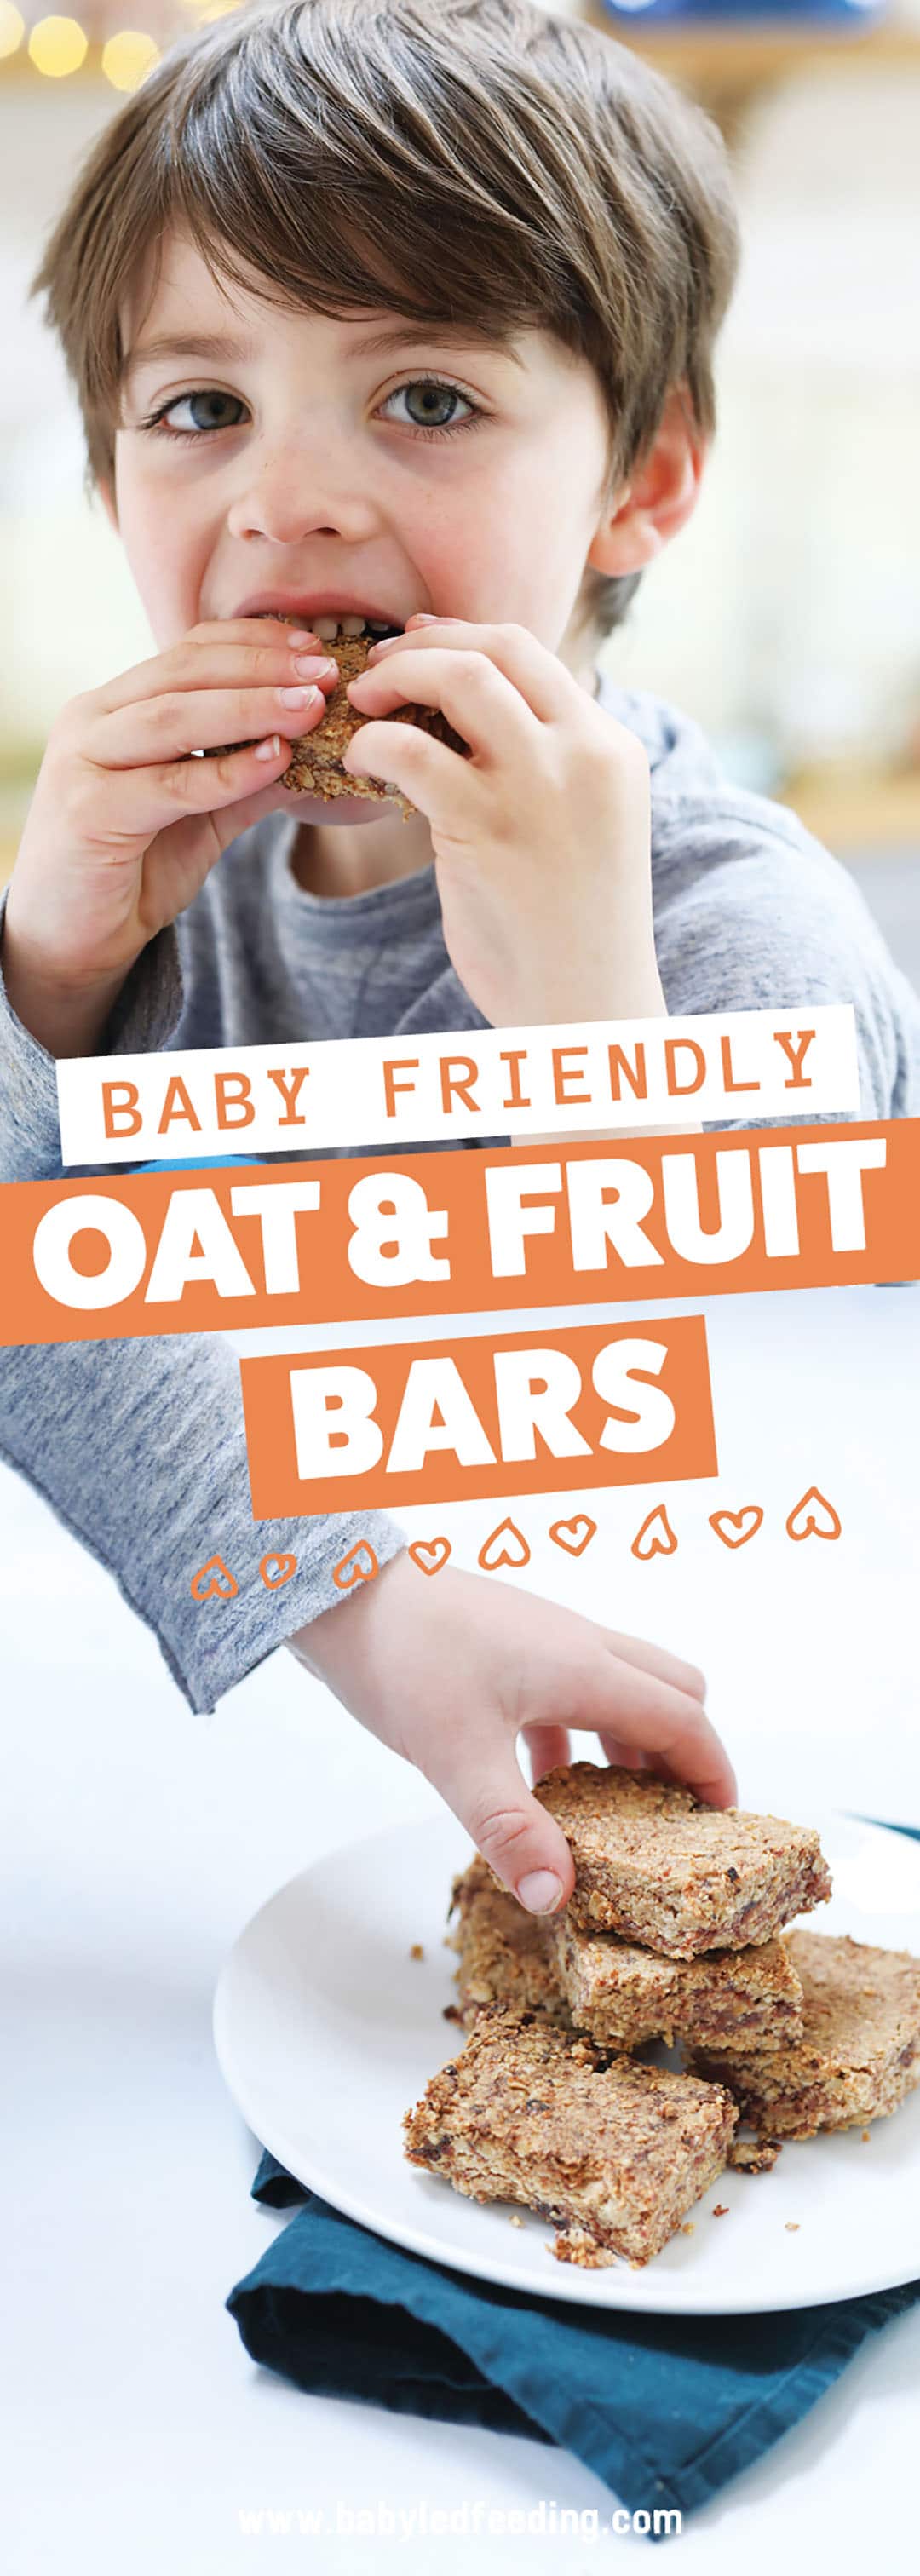 Super simple healthy snack bars for baby led weaning and kids. These easy oat bars have only 7 simple easy to find ingredients you probably already have in your pantry. Make ahead and snack all week! #babyledweaning #oatbars #healthysnacks #refinedsugarfree